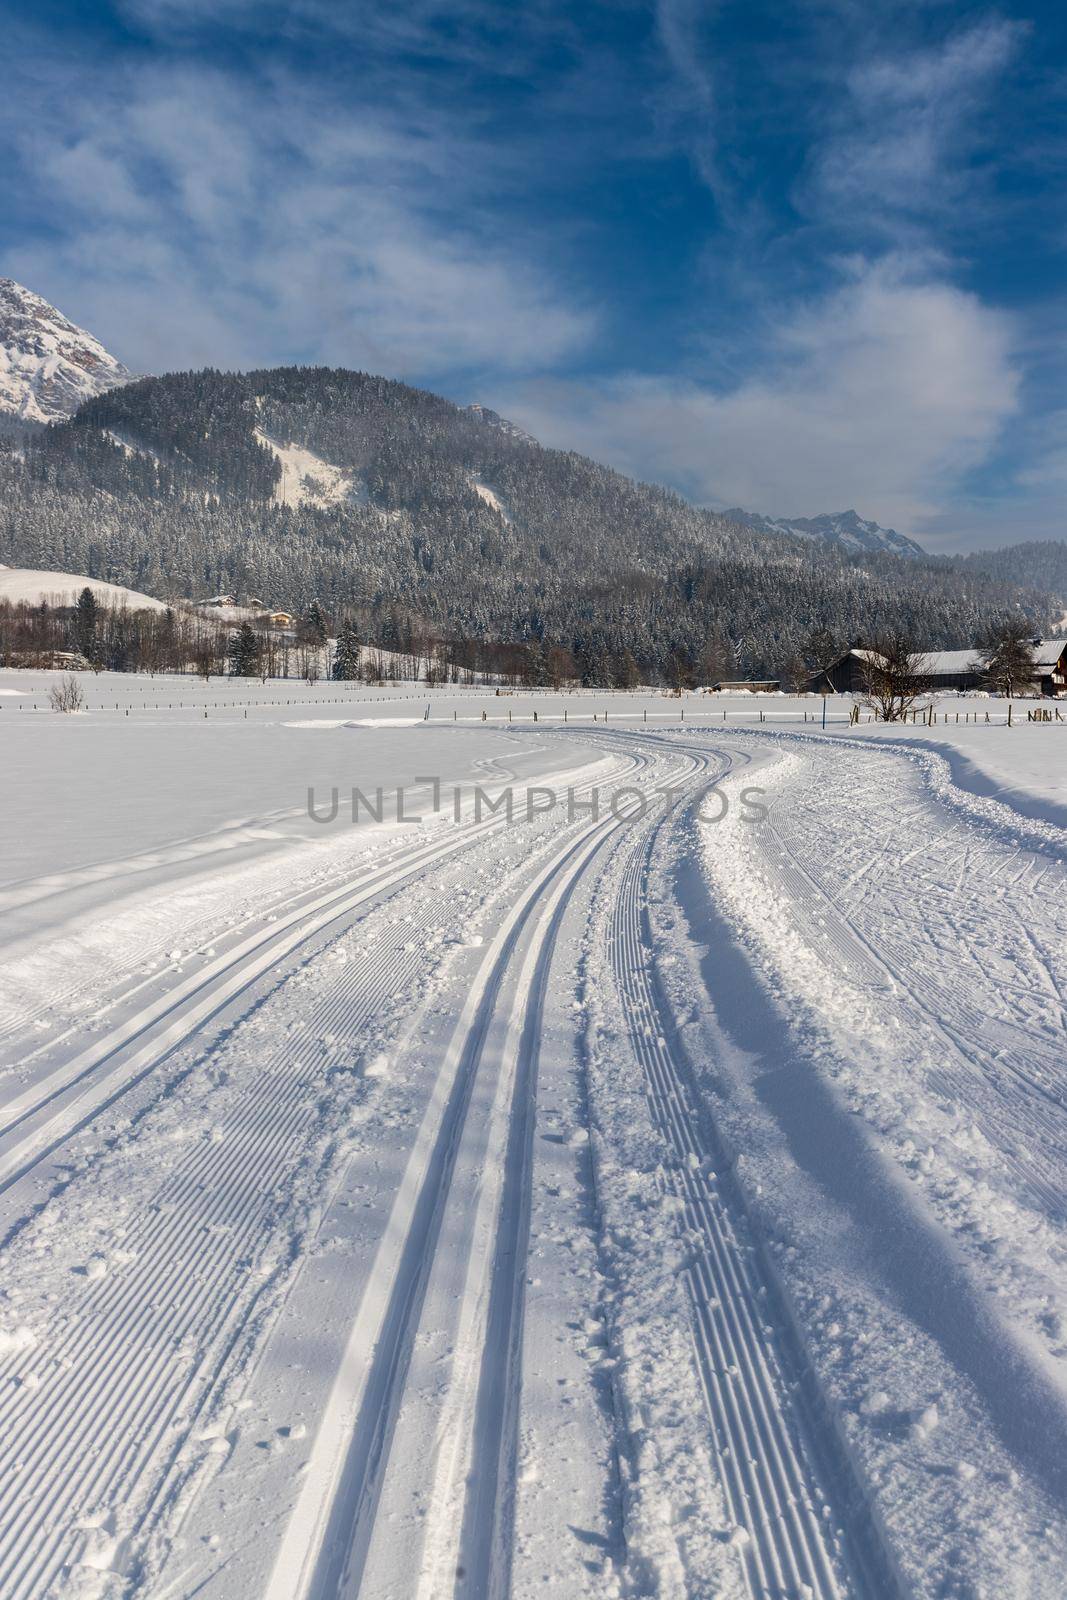 Cross-country skiing in Austria: Slope, fresh white powder snow and mountains by Daxenbichler